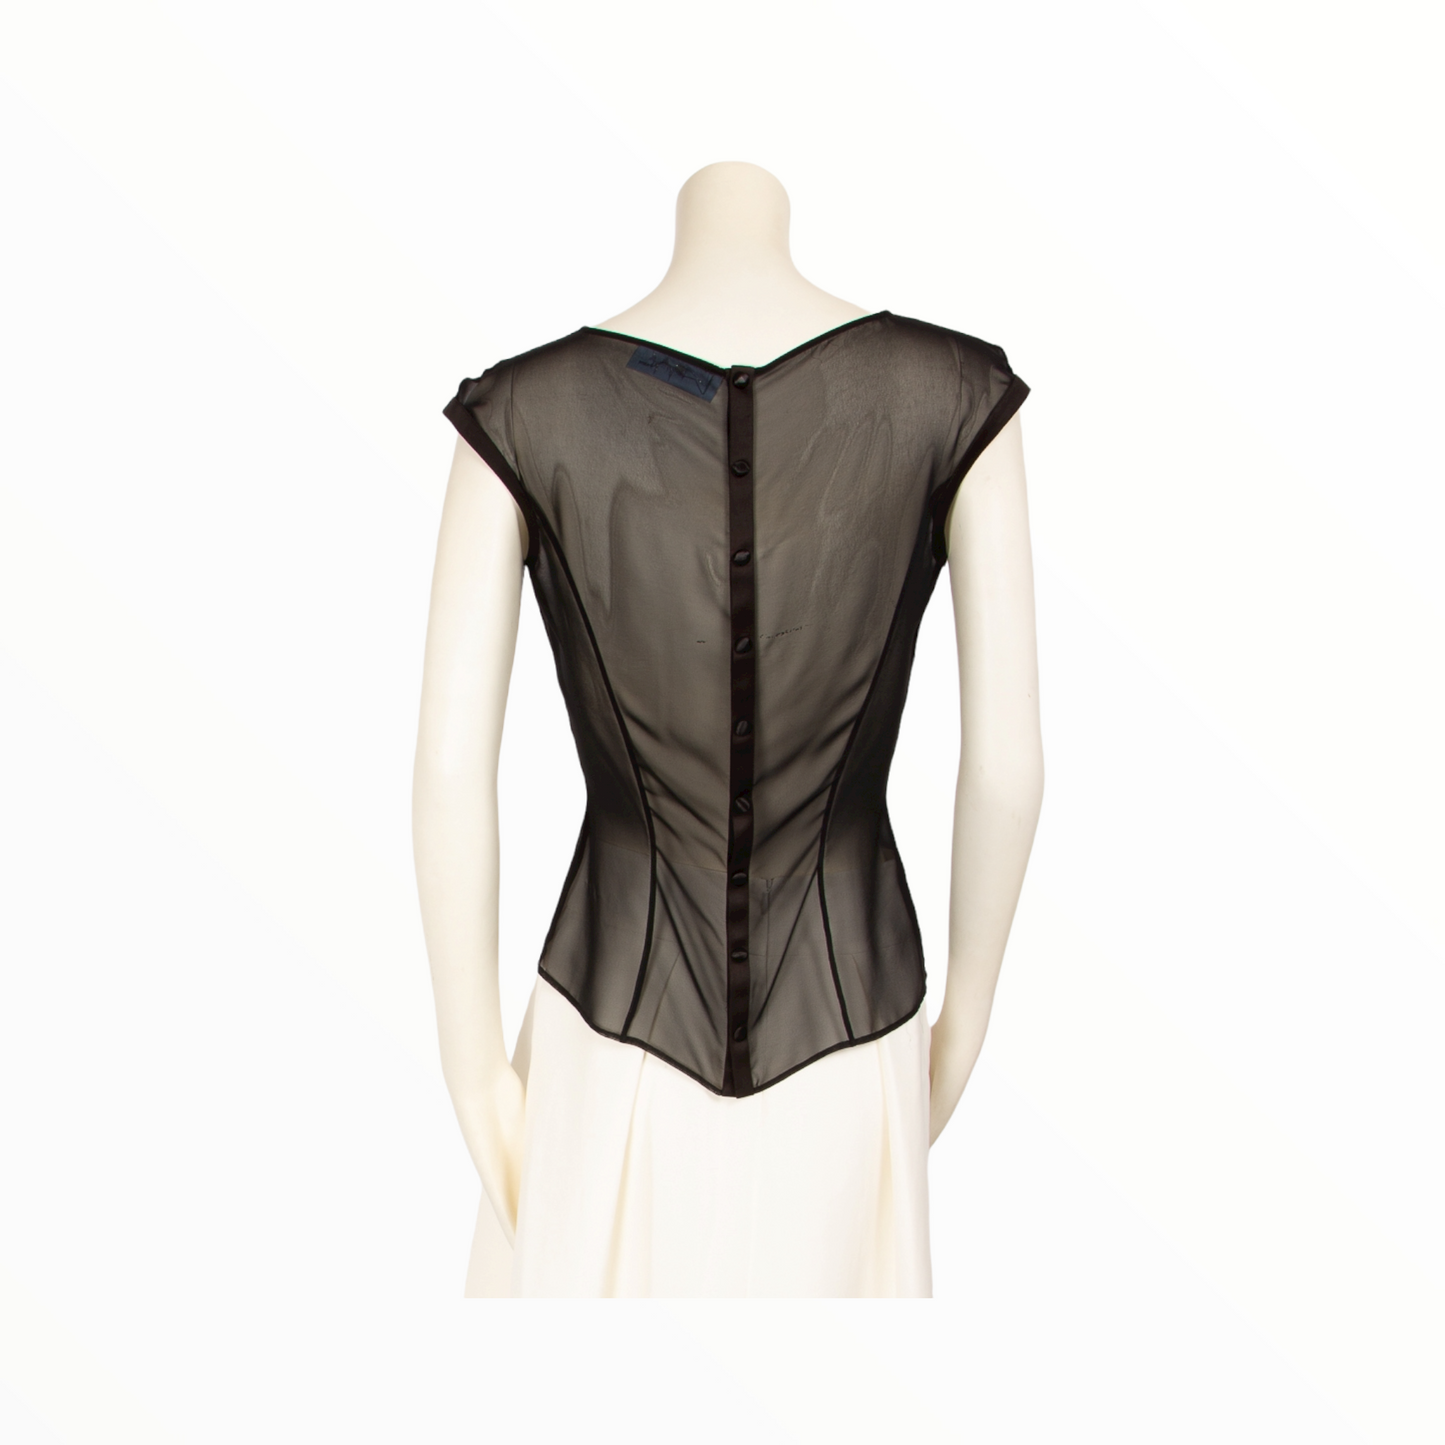 THIERRY MUGLER Tops vintage Lysis Paris pre-owned secondhand